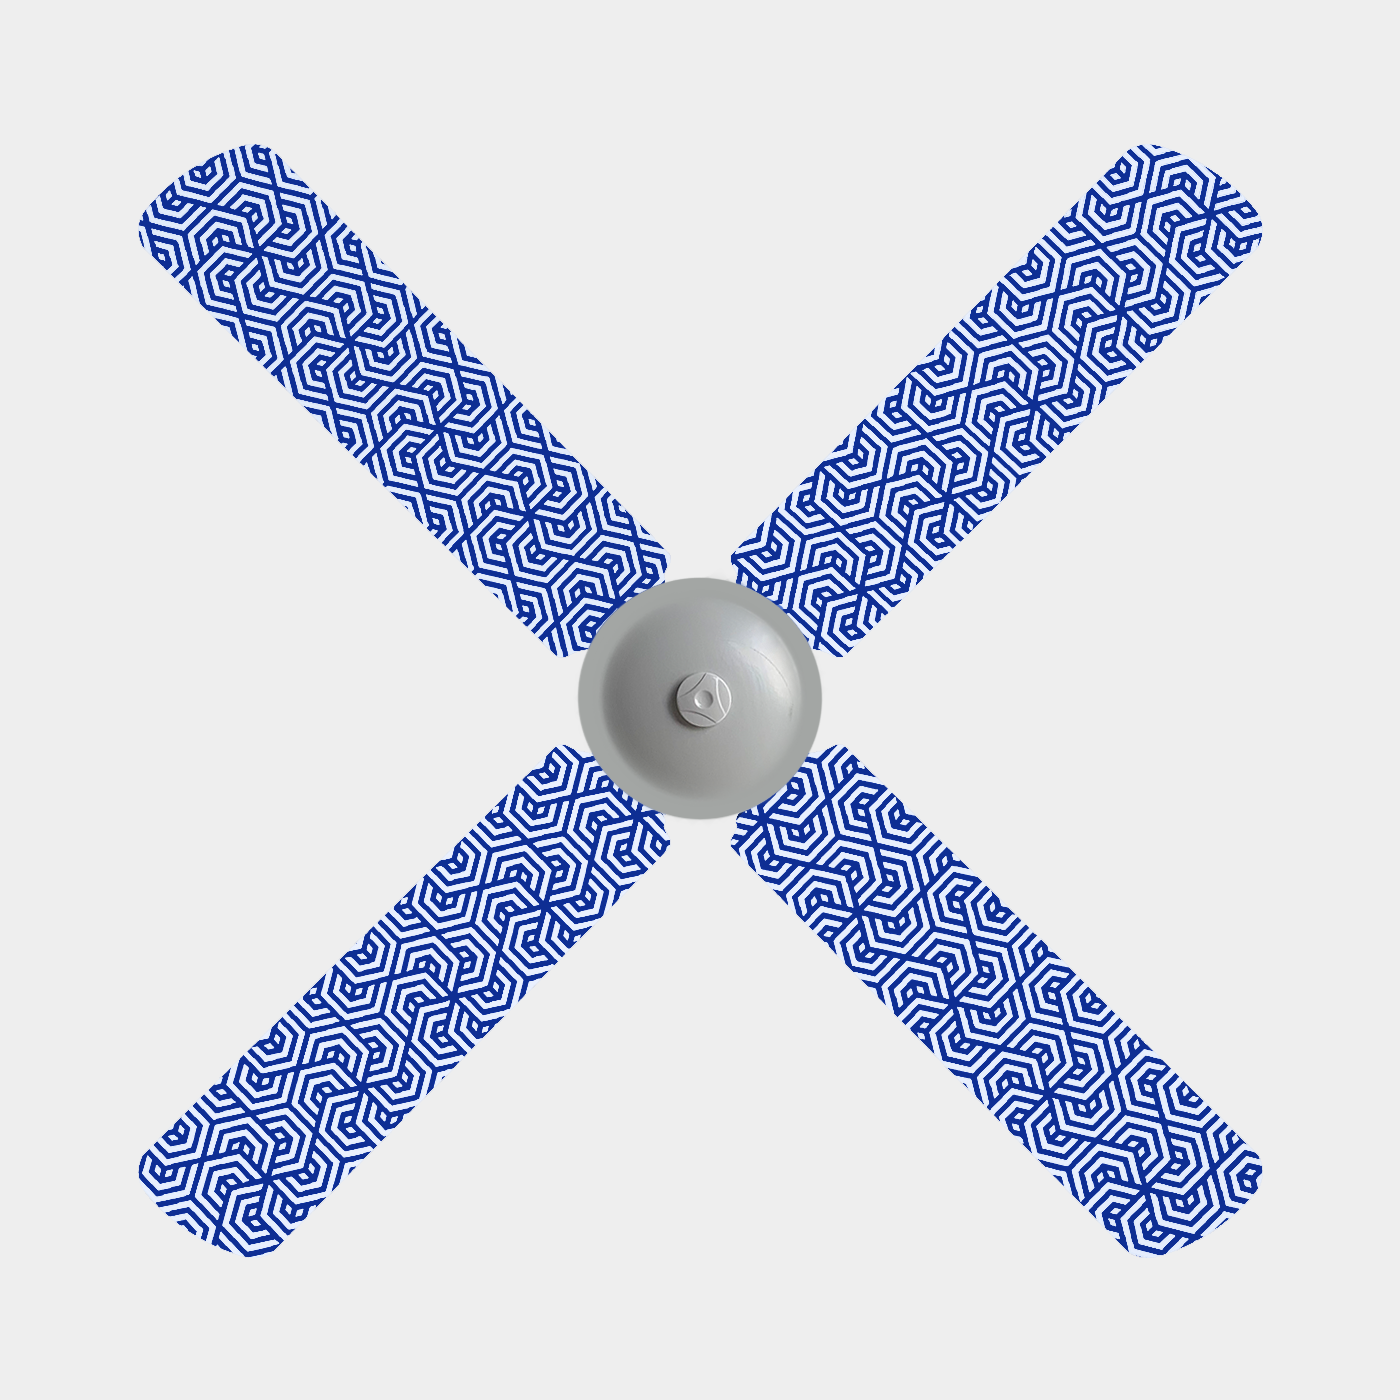 Fabric covers with blue background and white geometric pattern on four blade ceiling fan